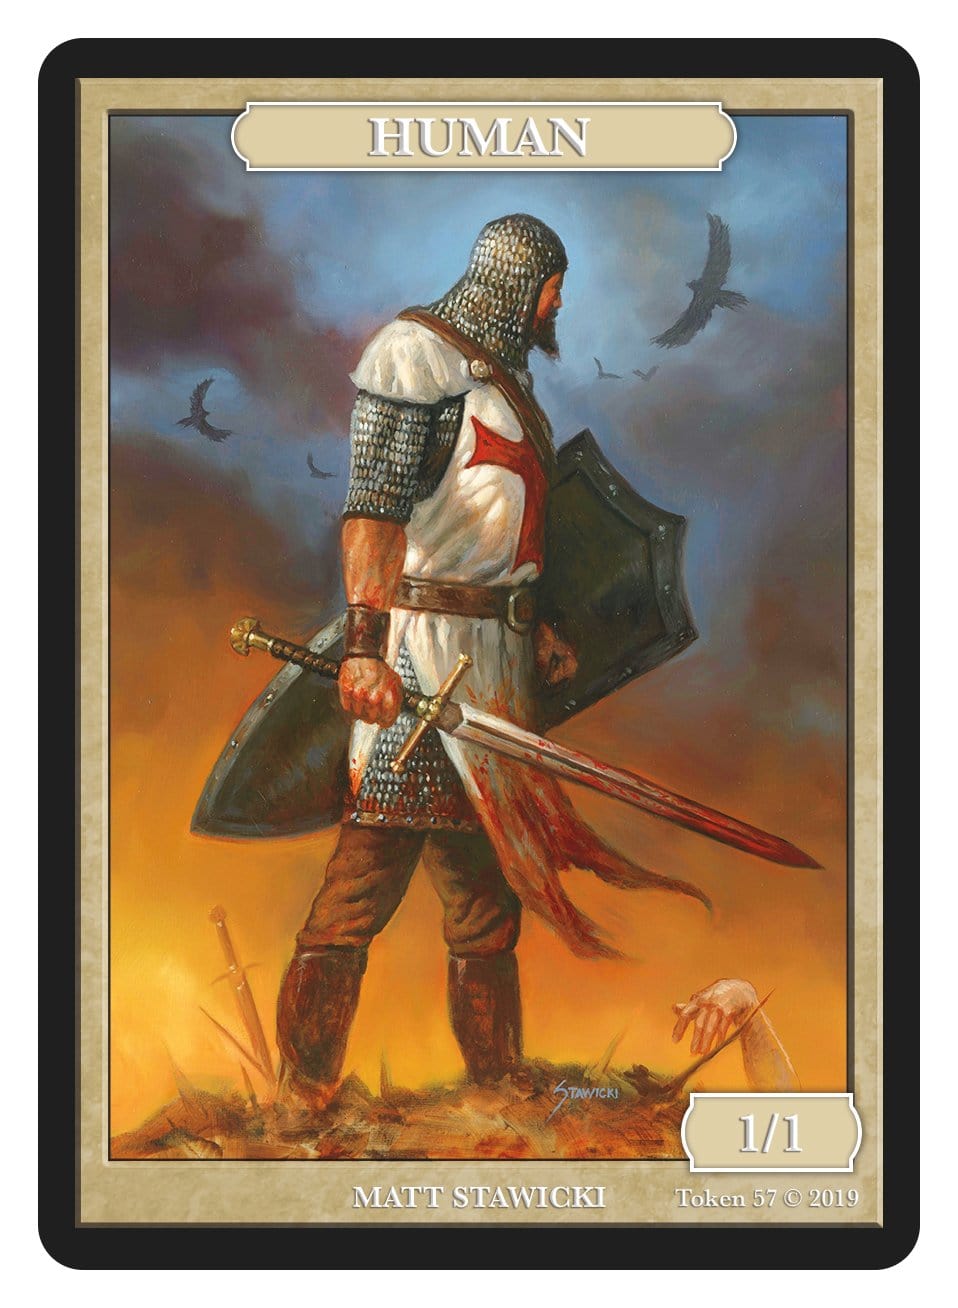 Human Token (1/1) by Matt Stawicki - Token - Original Magic Art - Accessories for Magic the Gathering and other card games